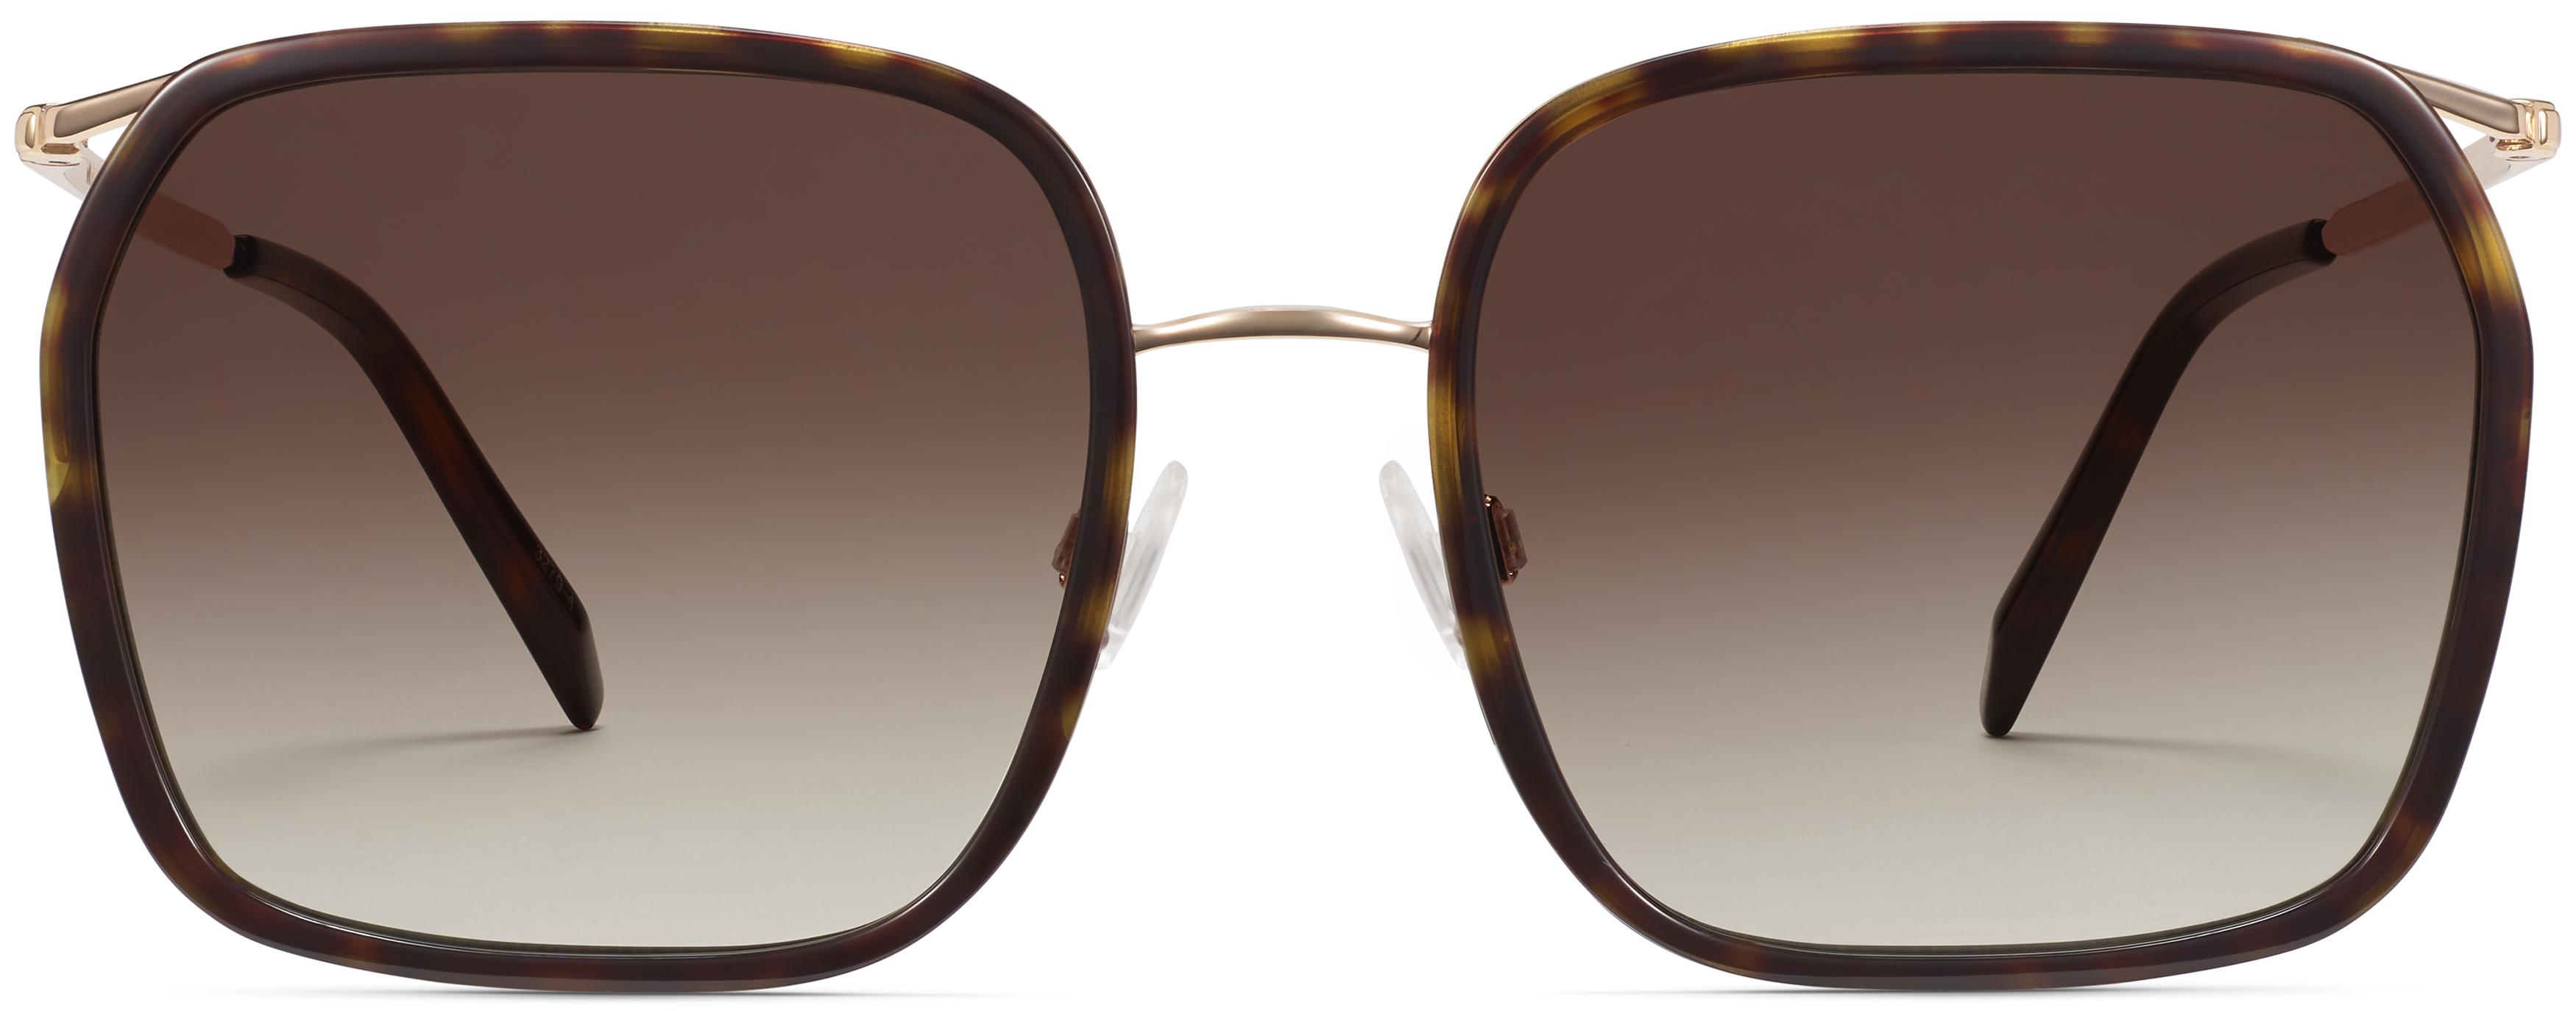 Catori Cognac Tortoise with Polished Gold